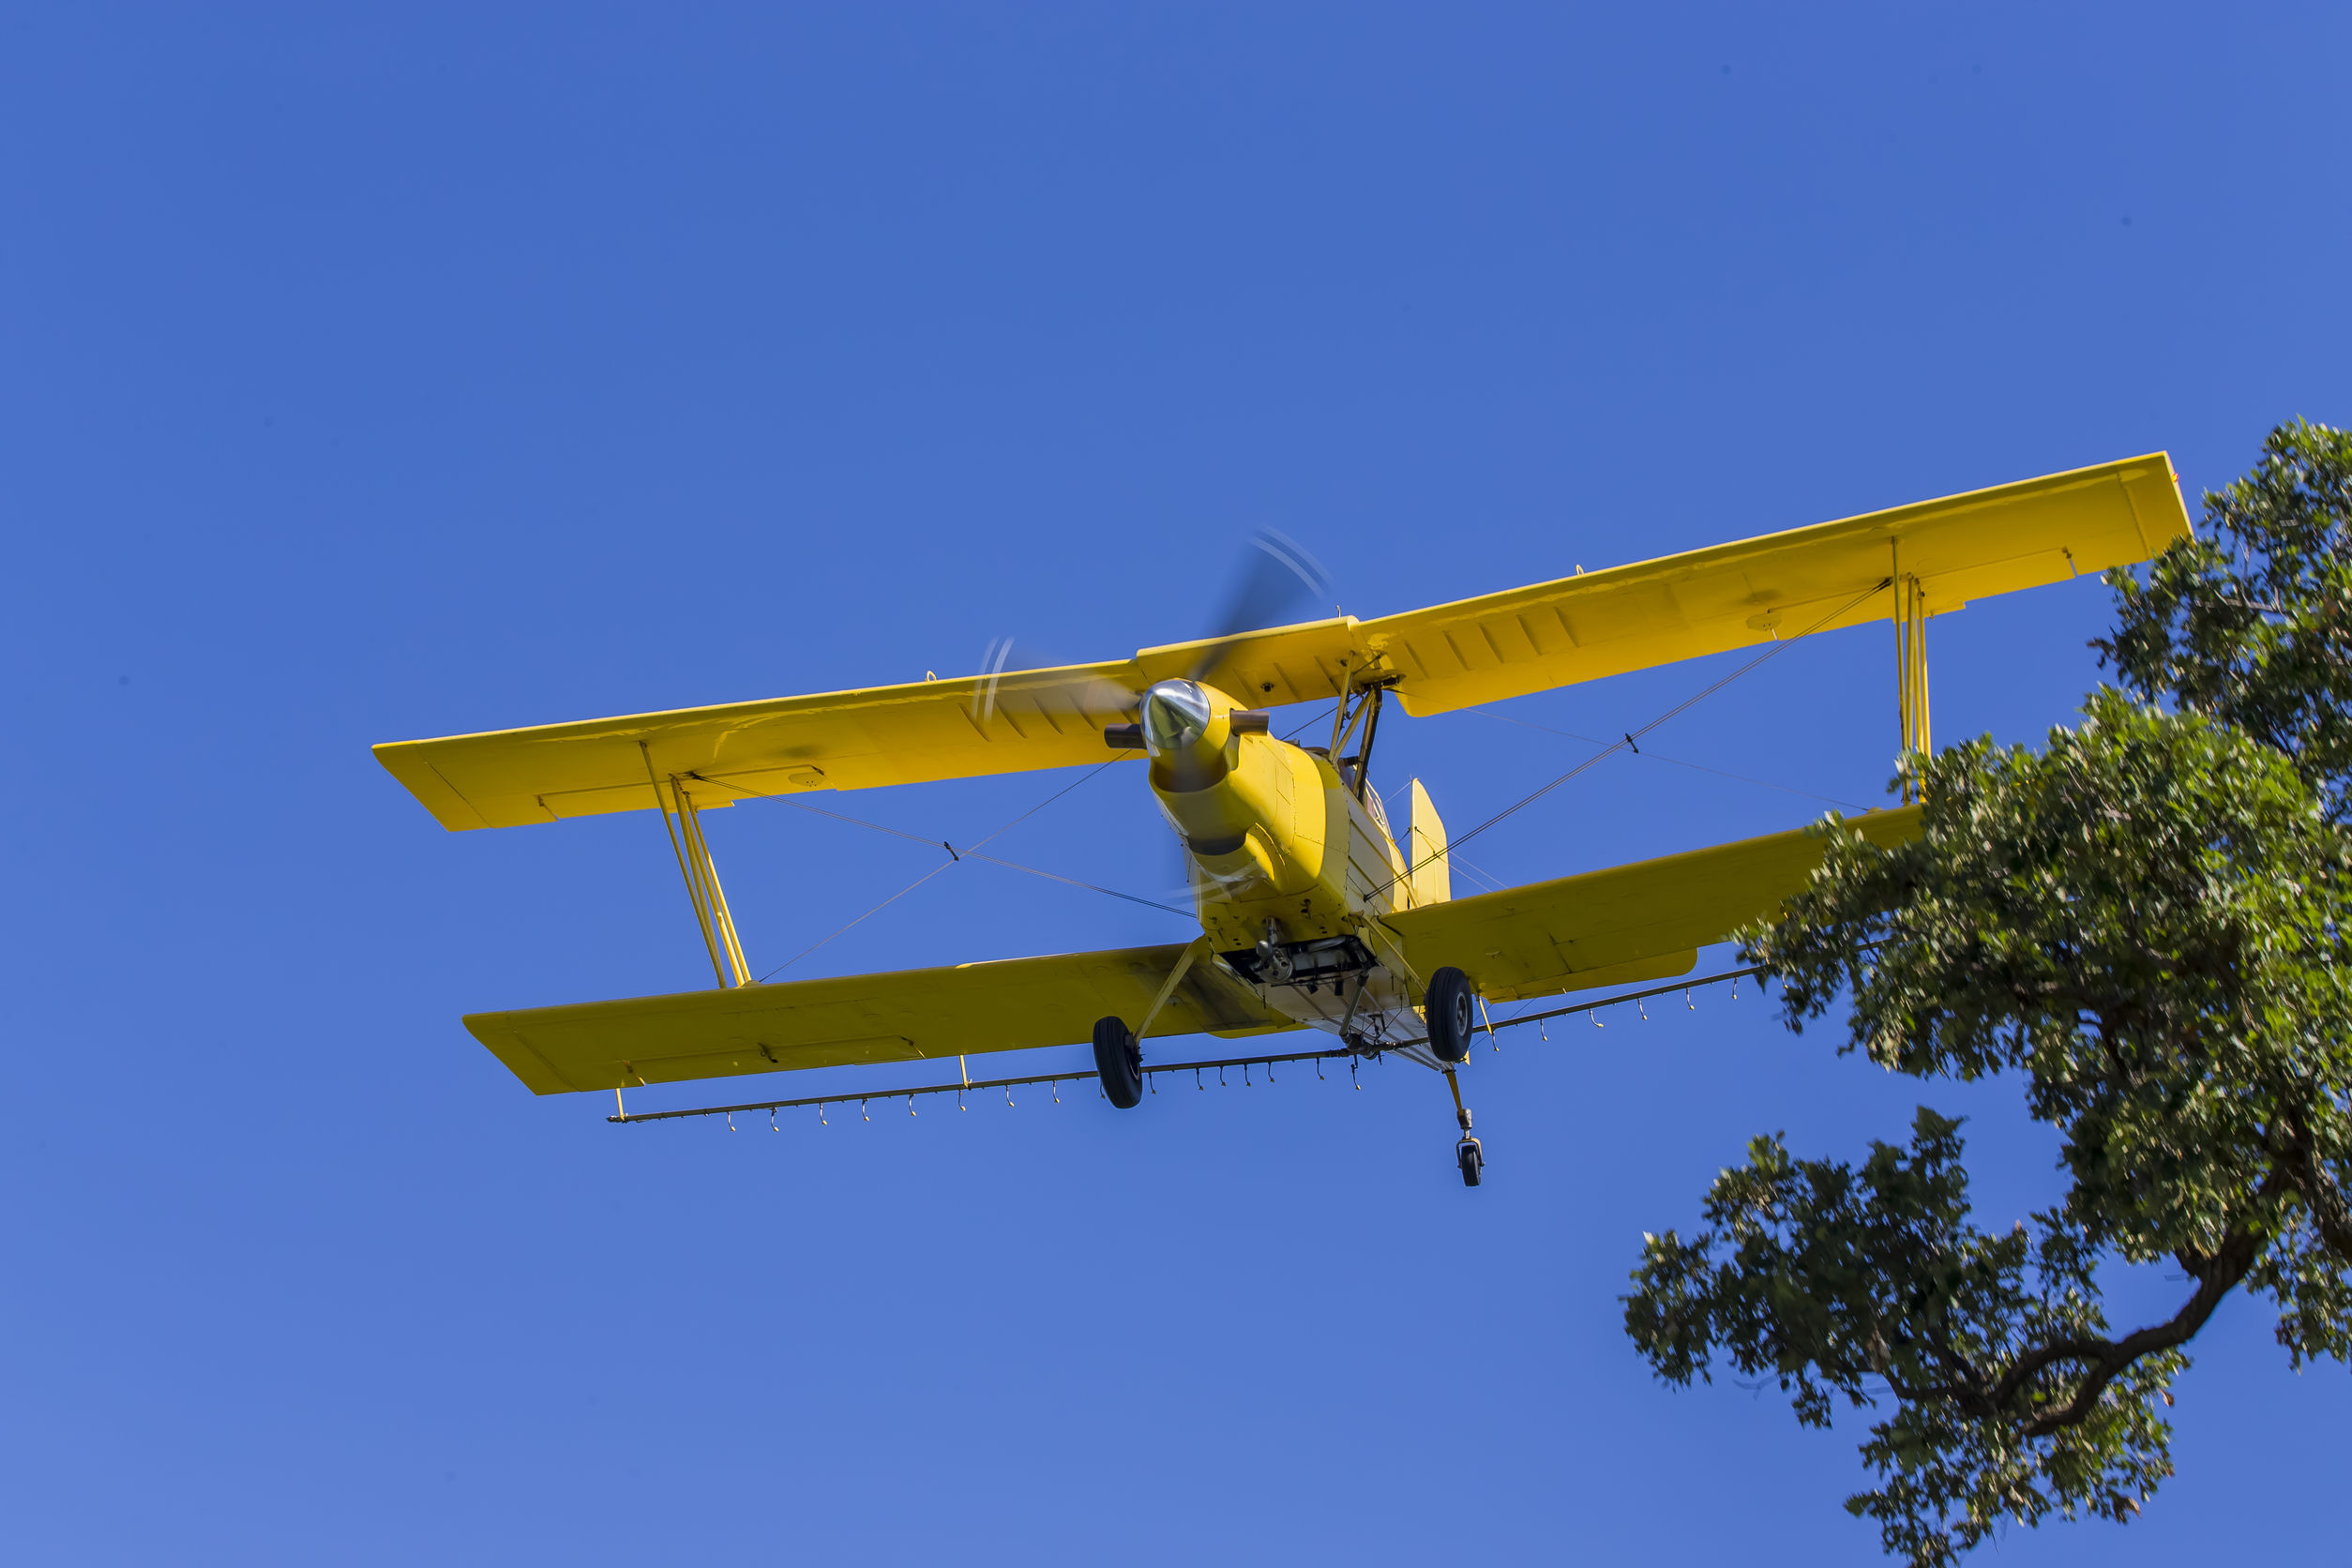 a crop duster applies chemicals to a field of vegetation.